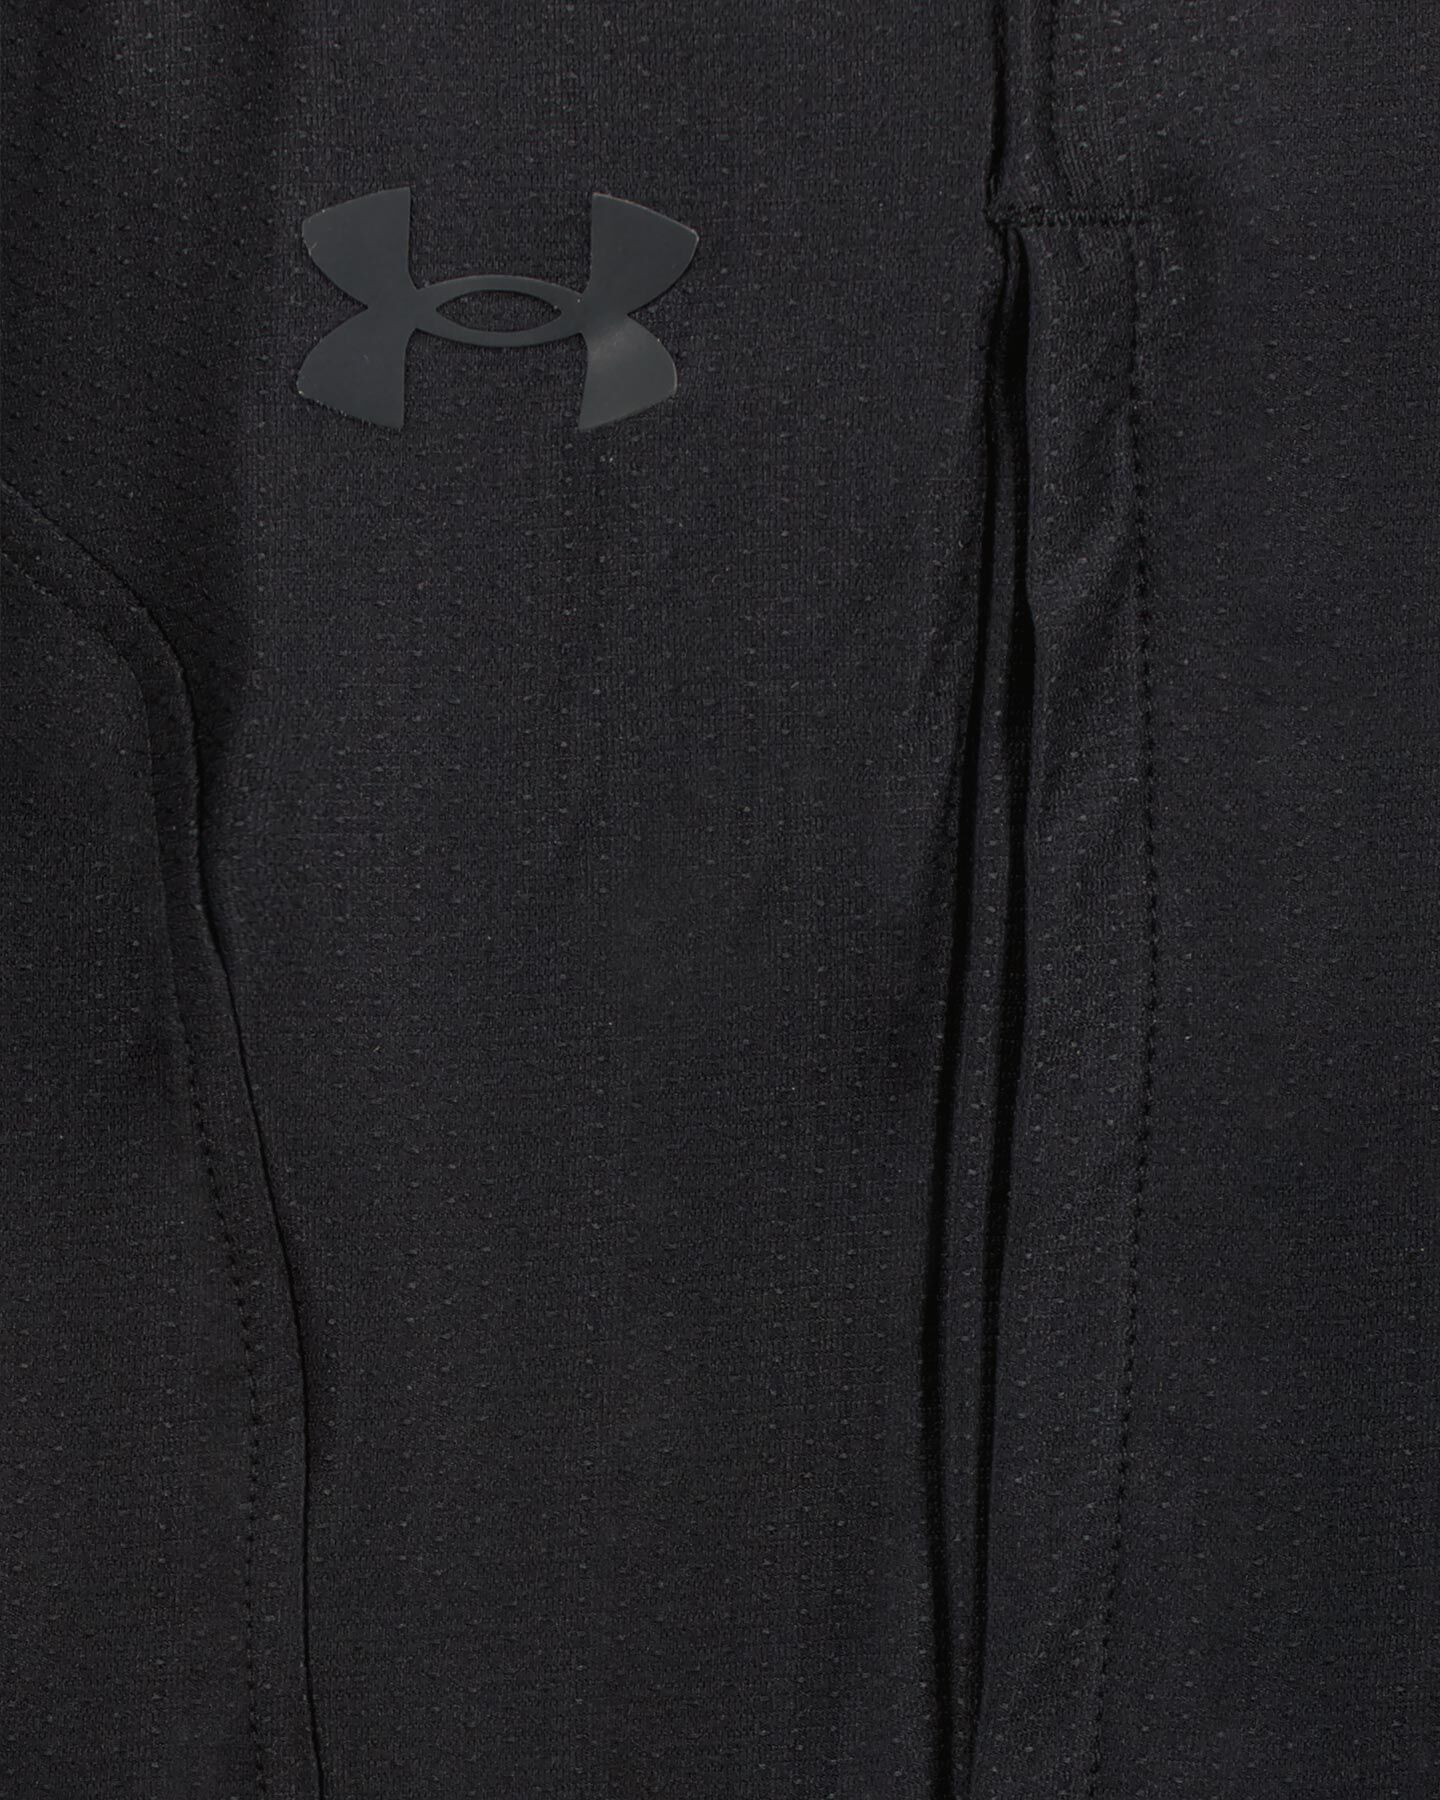  Pantaloncini basket UNDER ARMOUR ELEVATED PERFORMANCE M S5229452 scatto 3